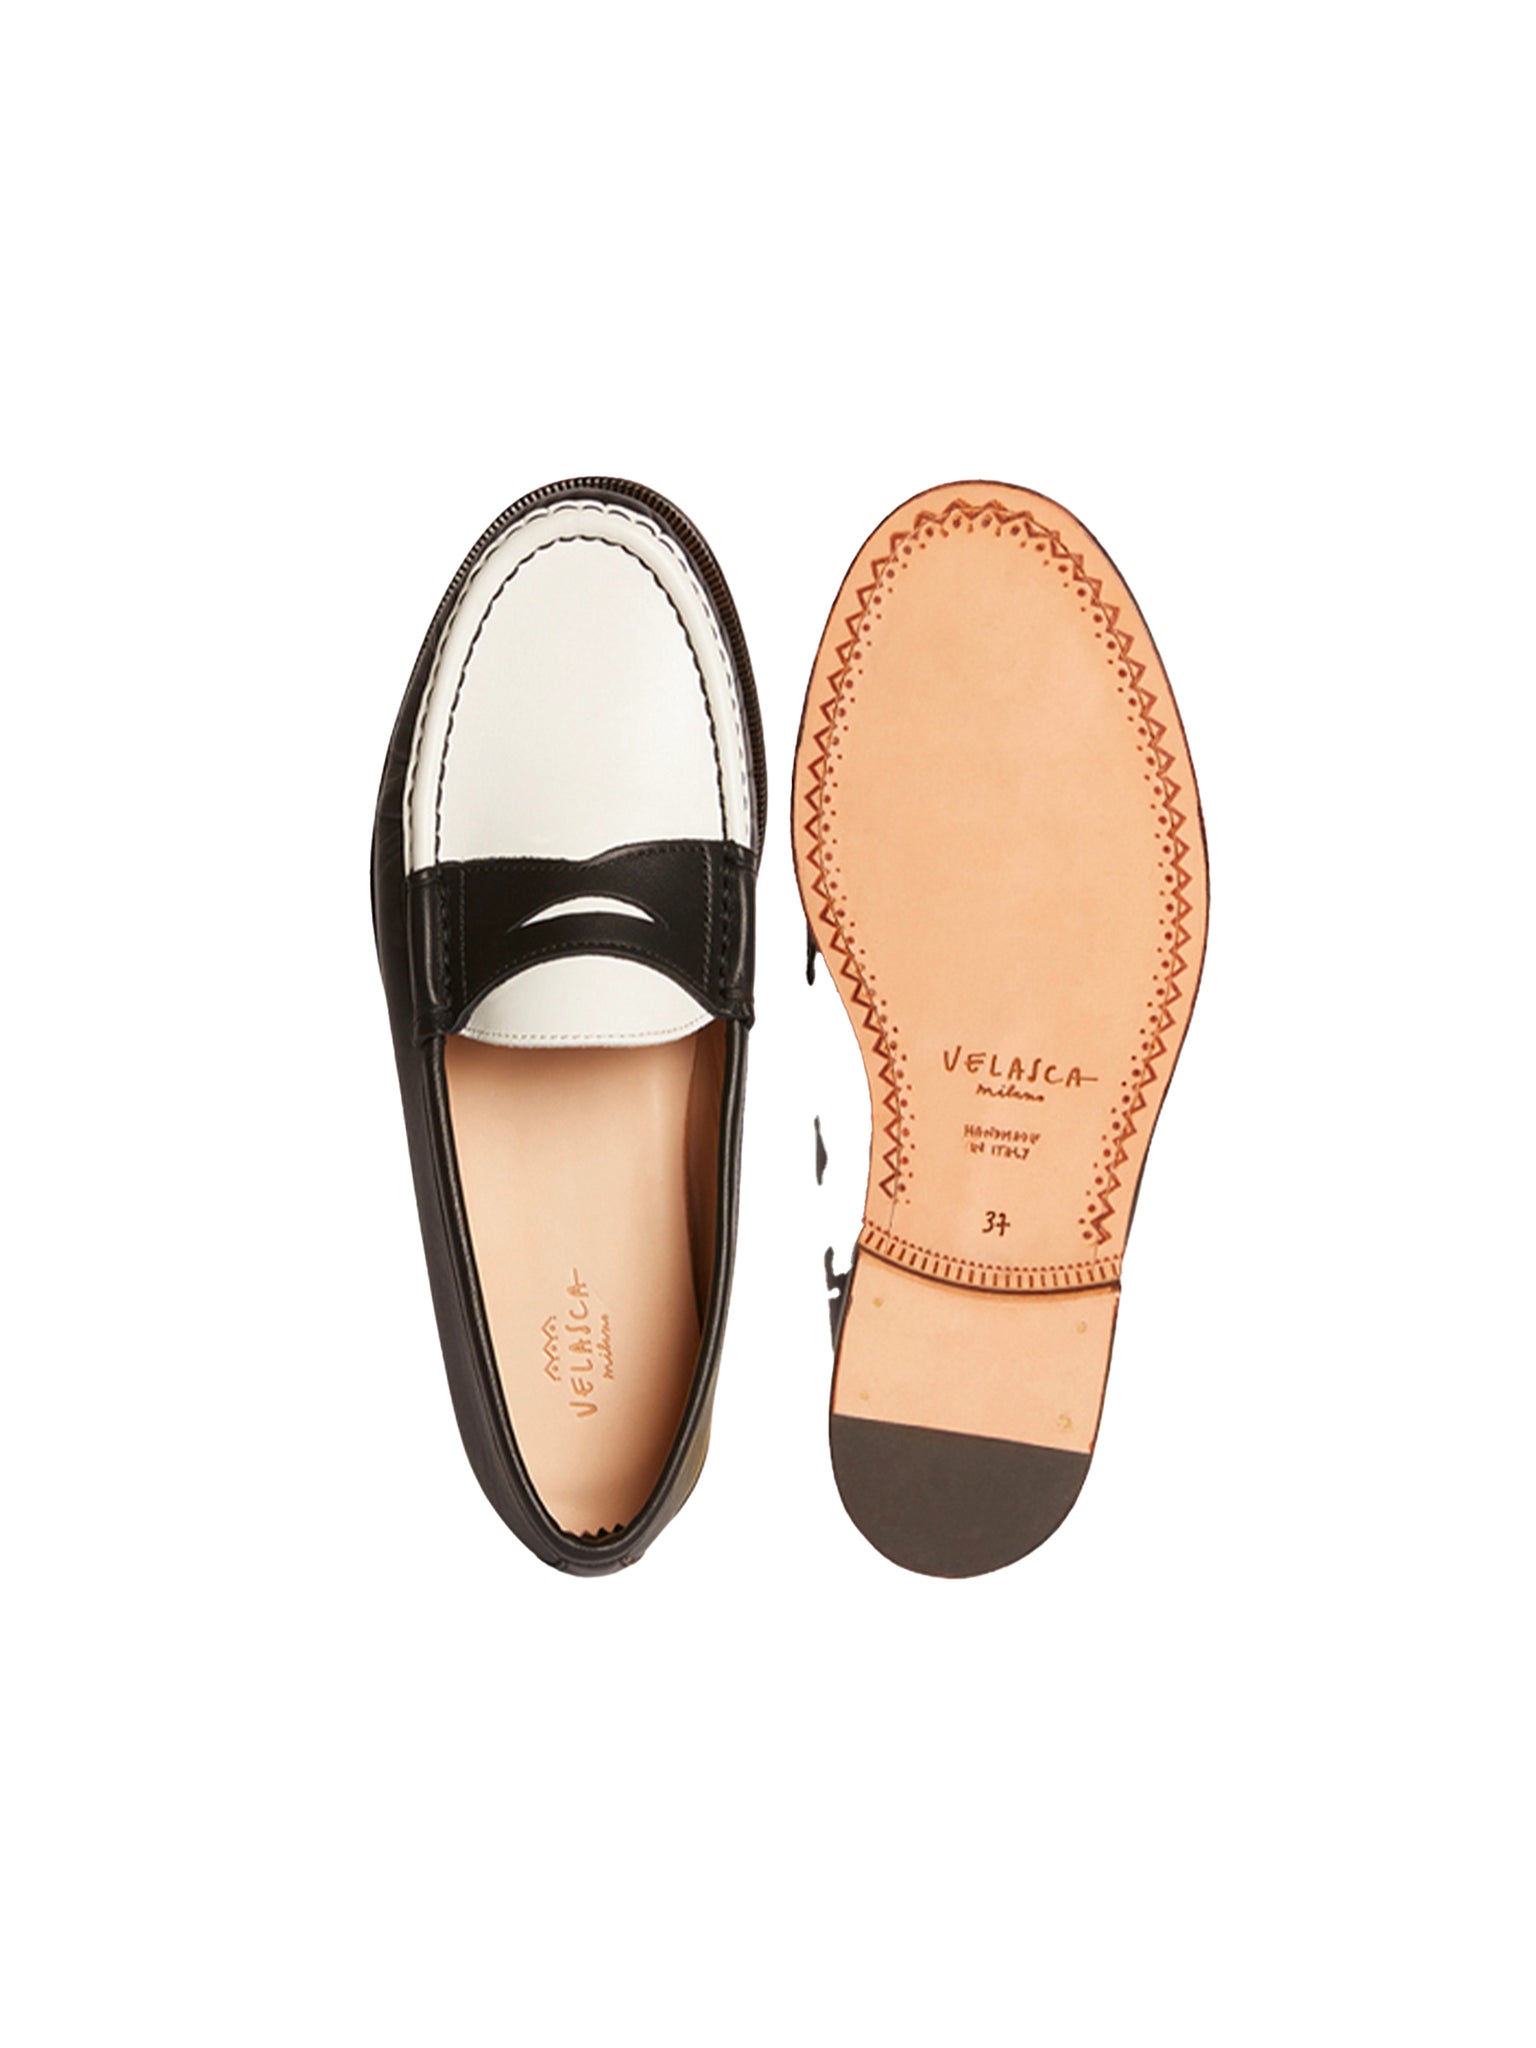 Penny loafers	Canoccial	Black & White